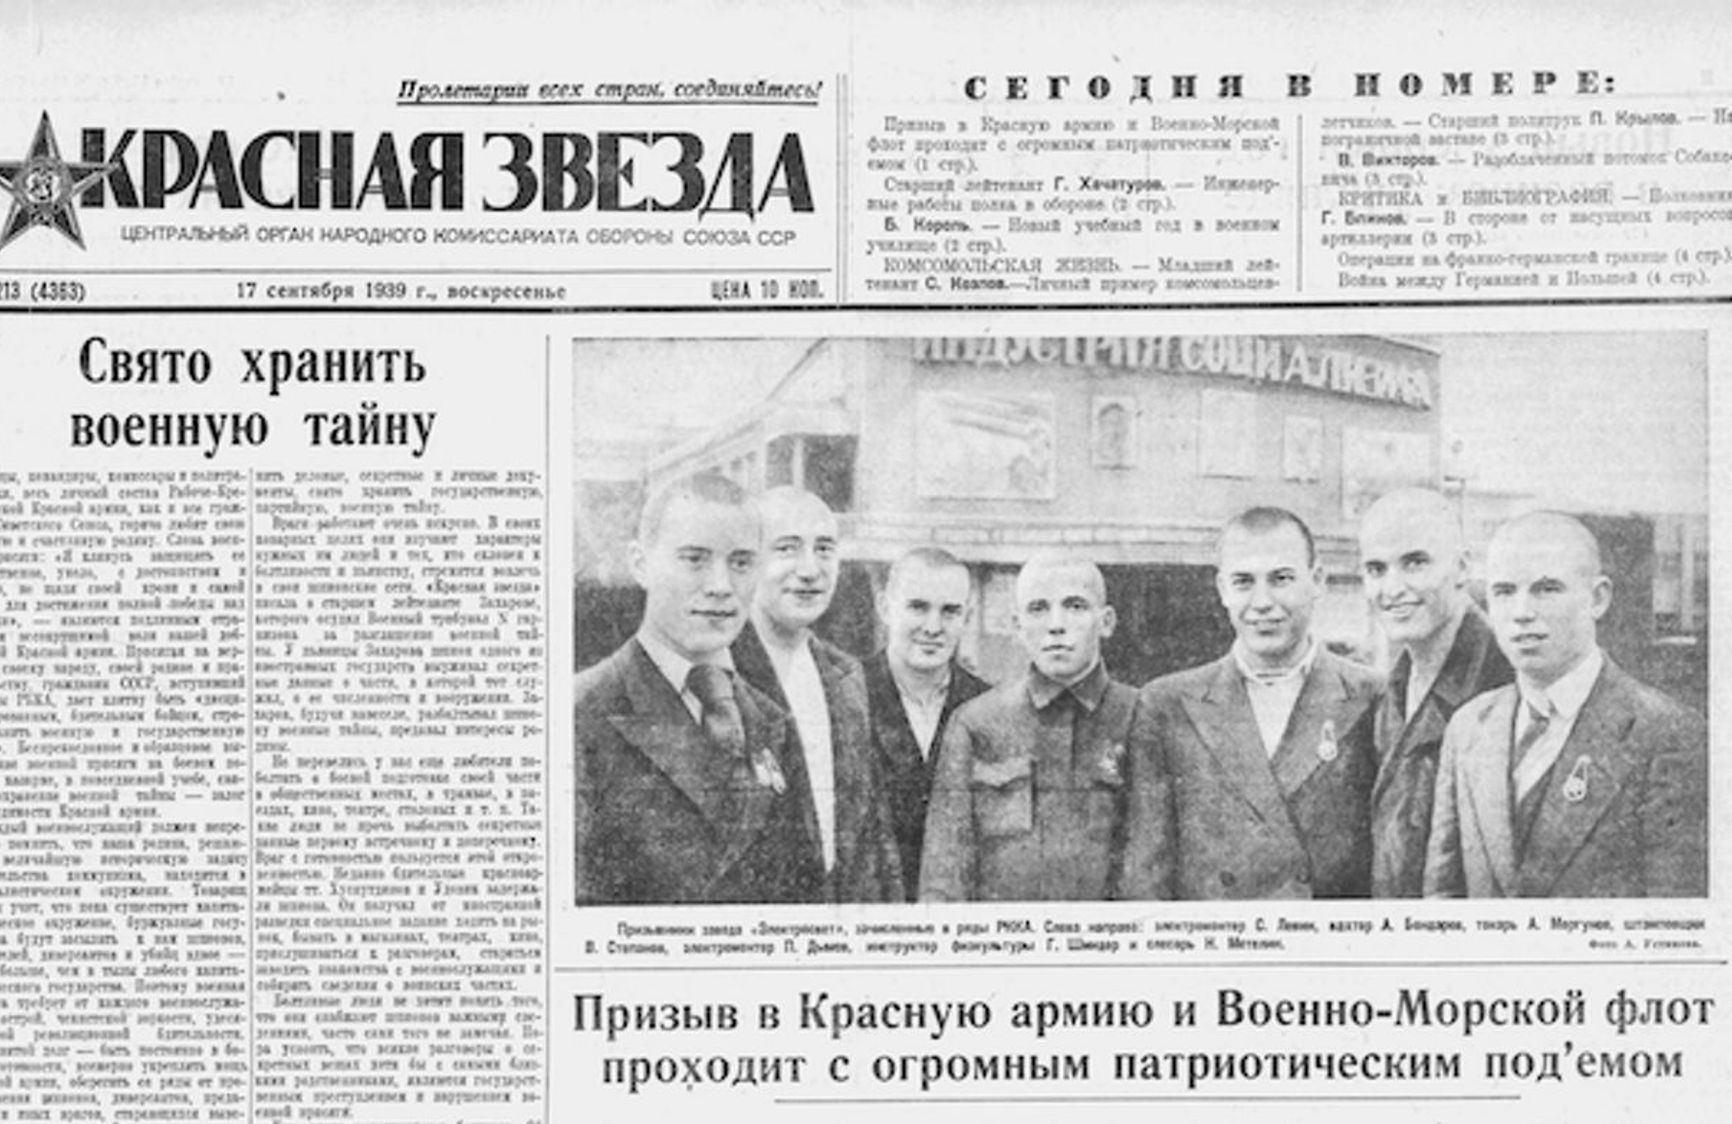 The newspaper «Red Star» of 17.09.1939